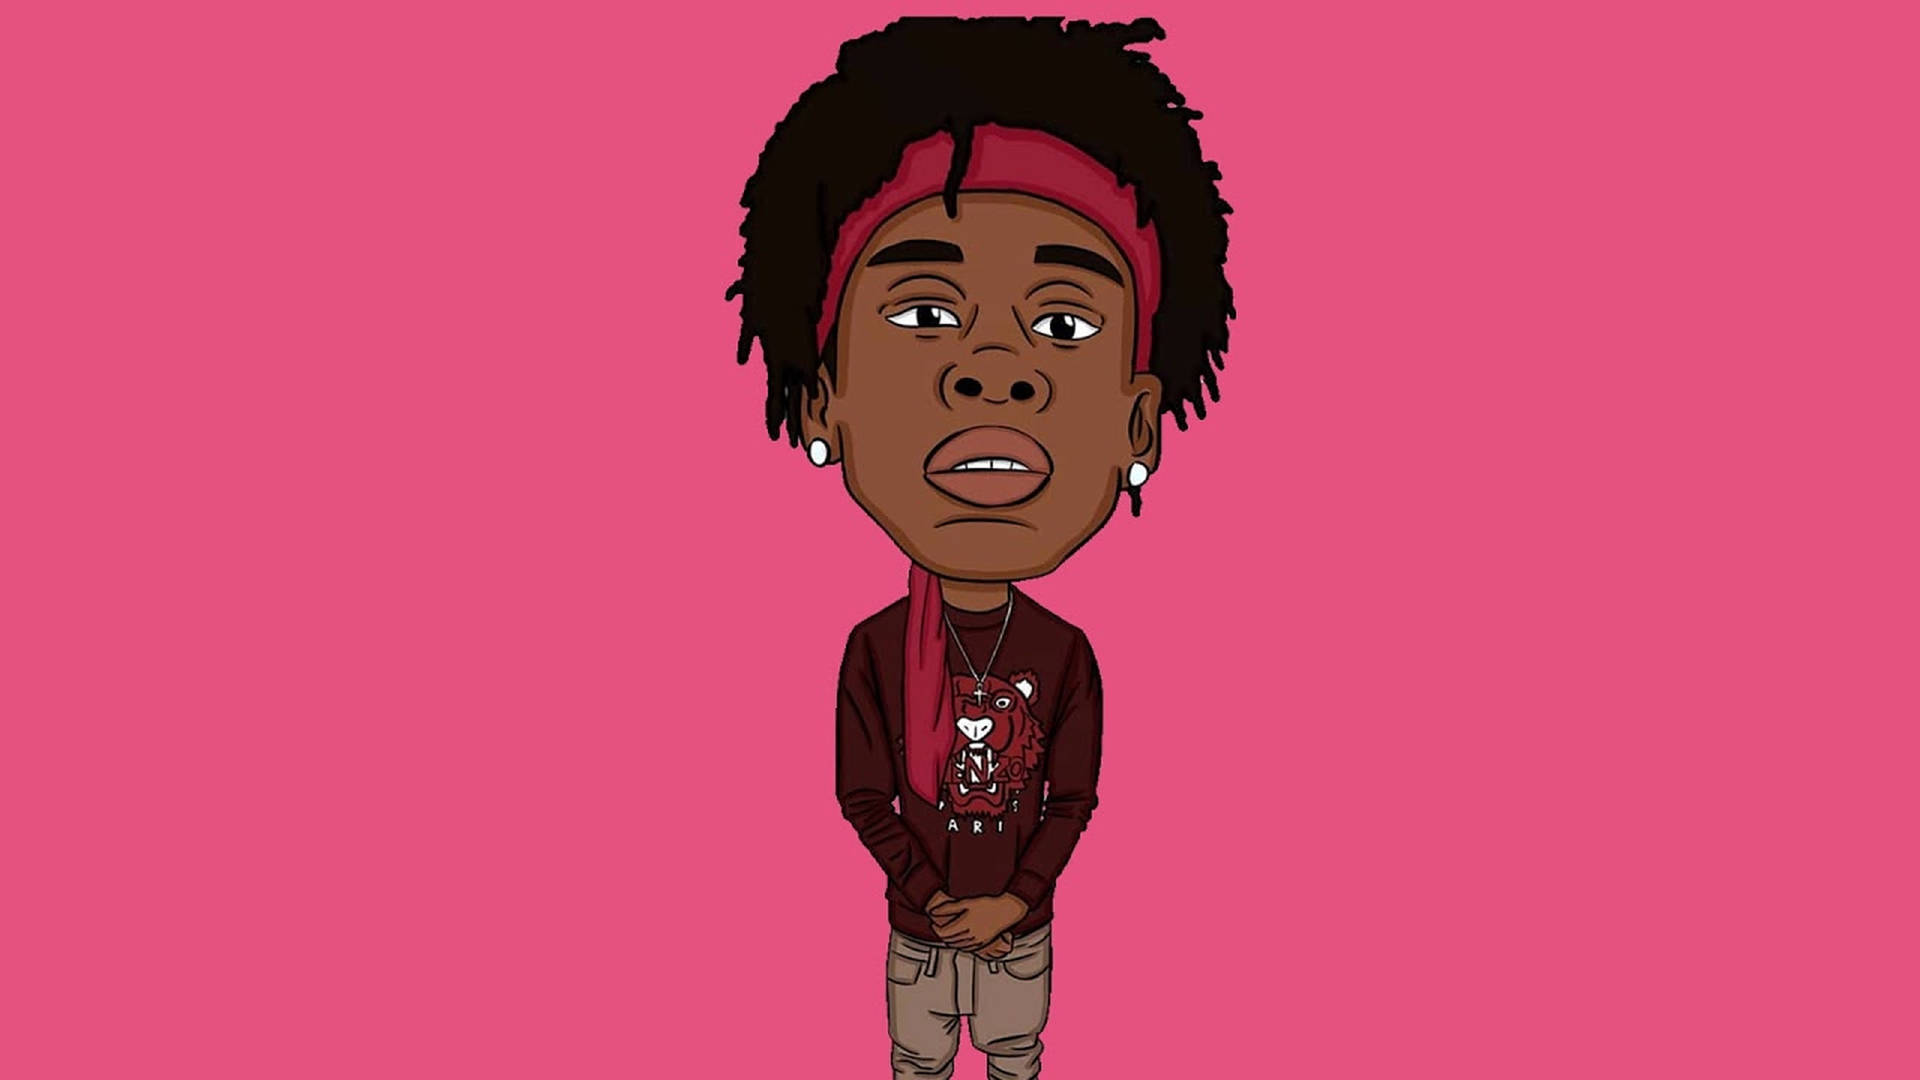 Polo G Pink Art Background